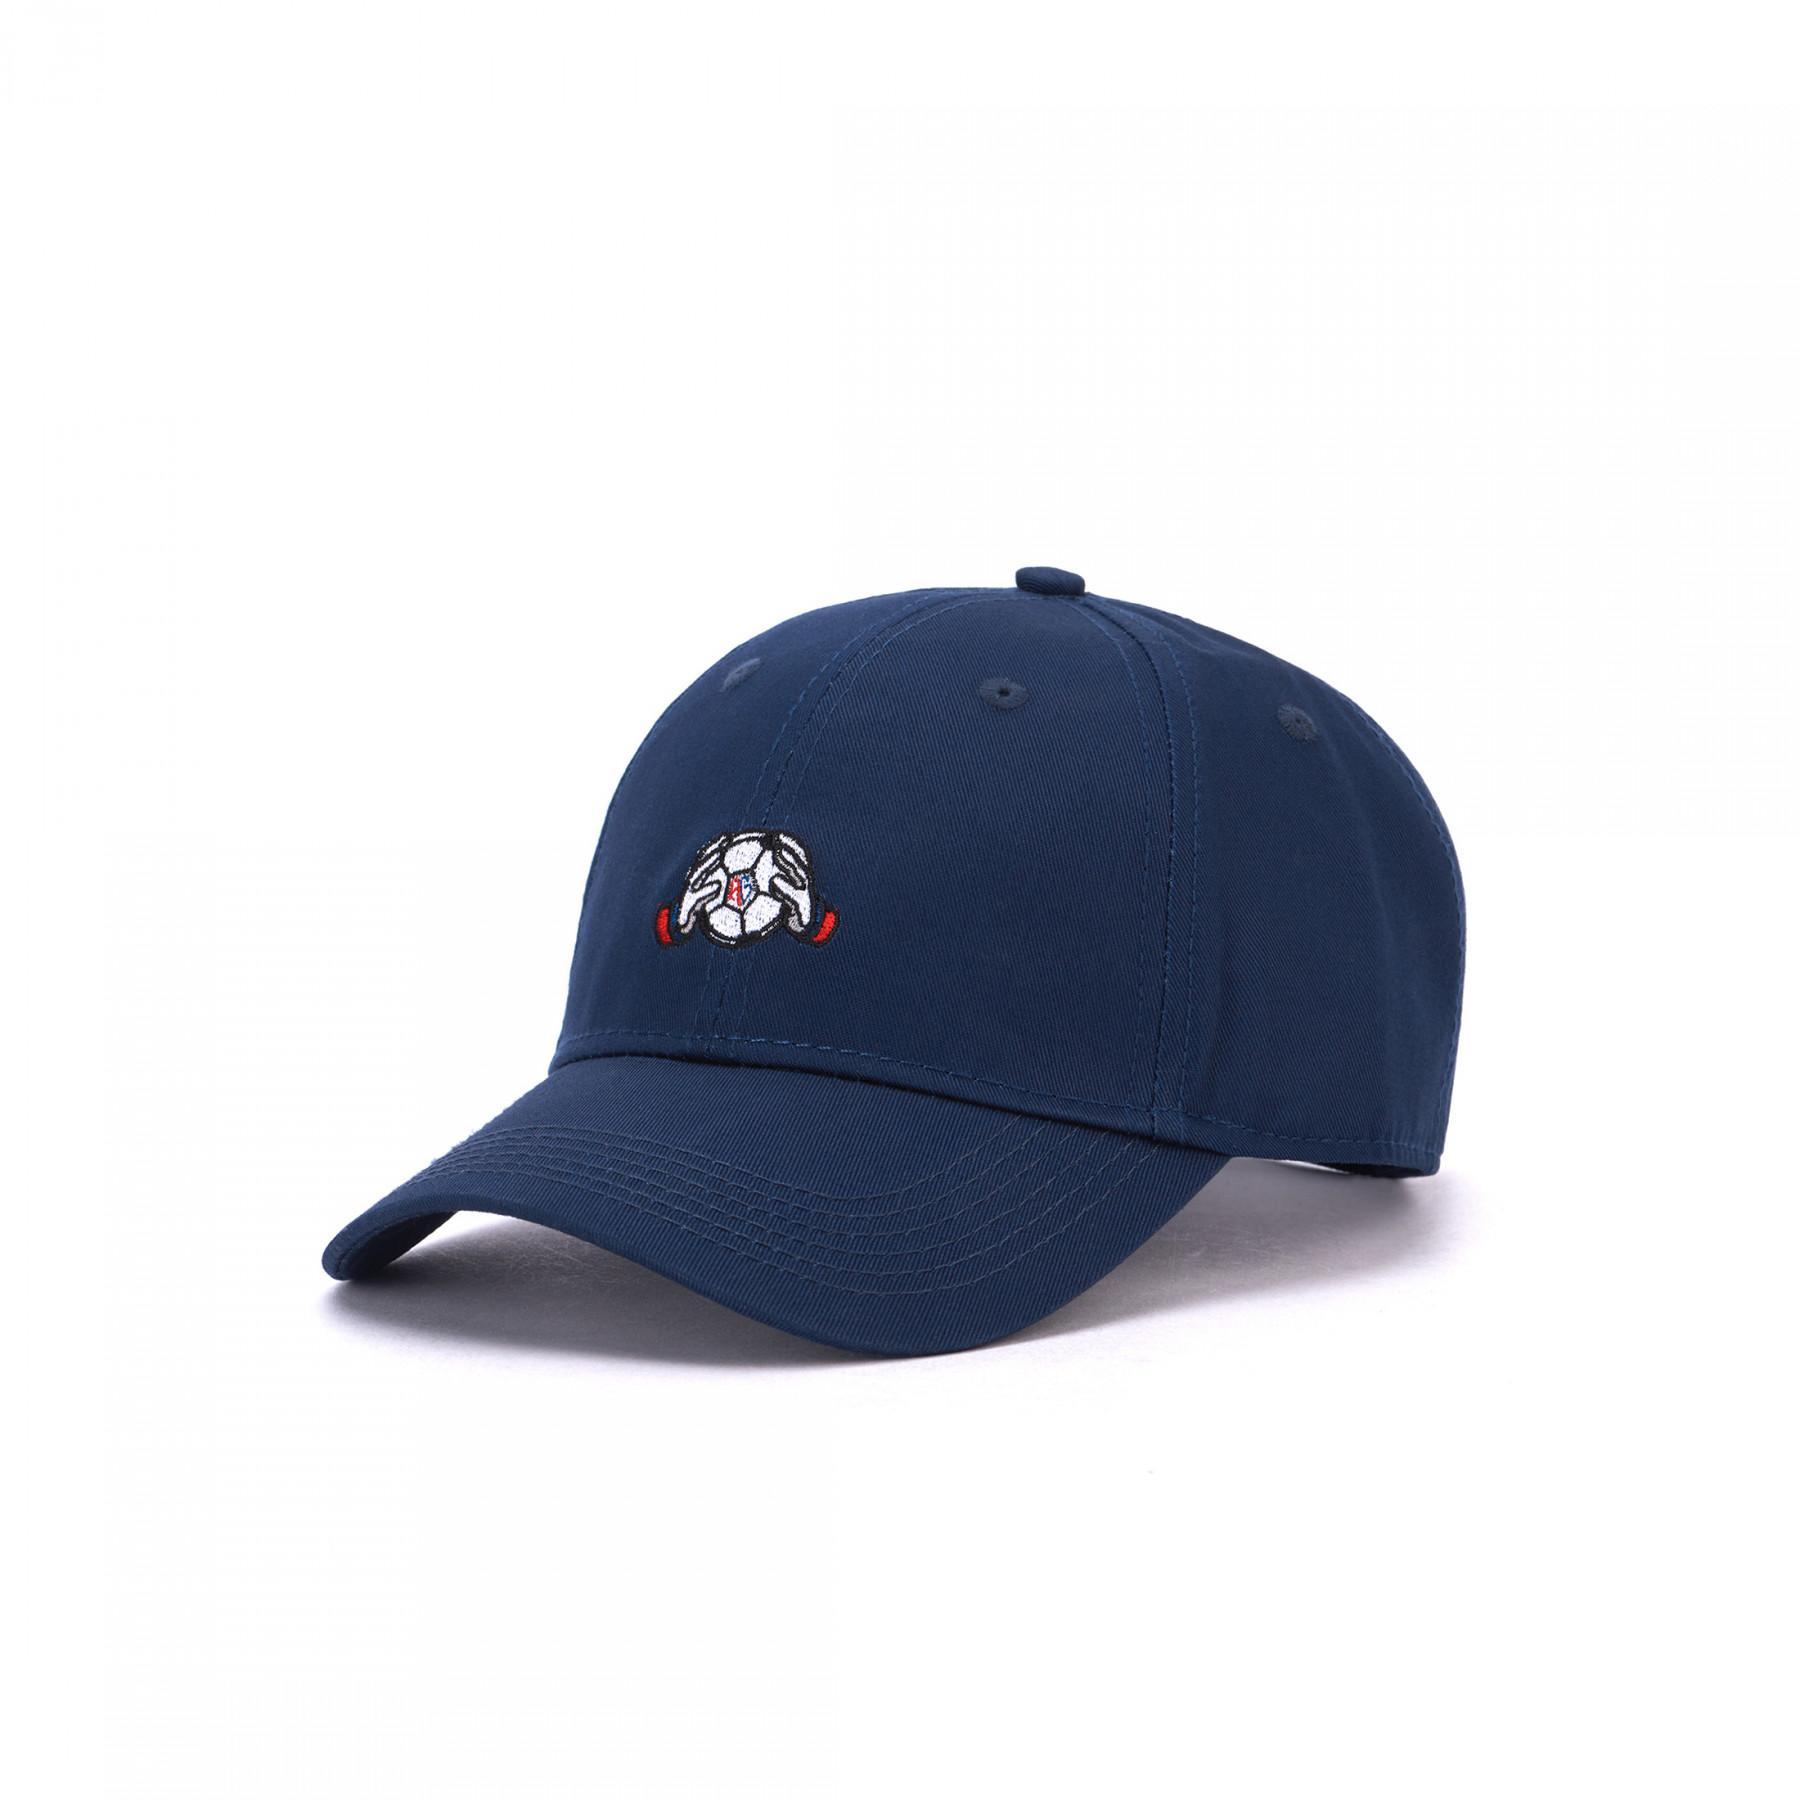 Casquette Hand of Gold hog keeper curved